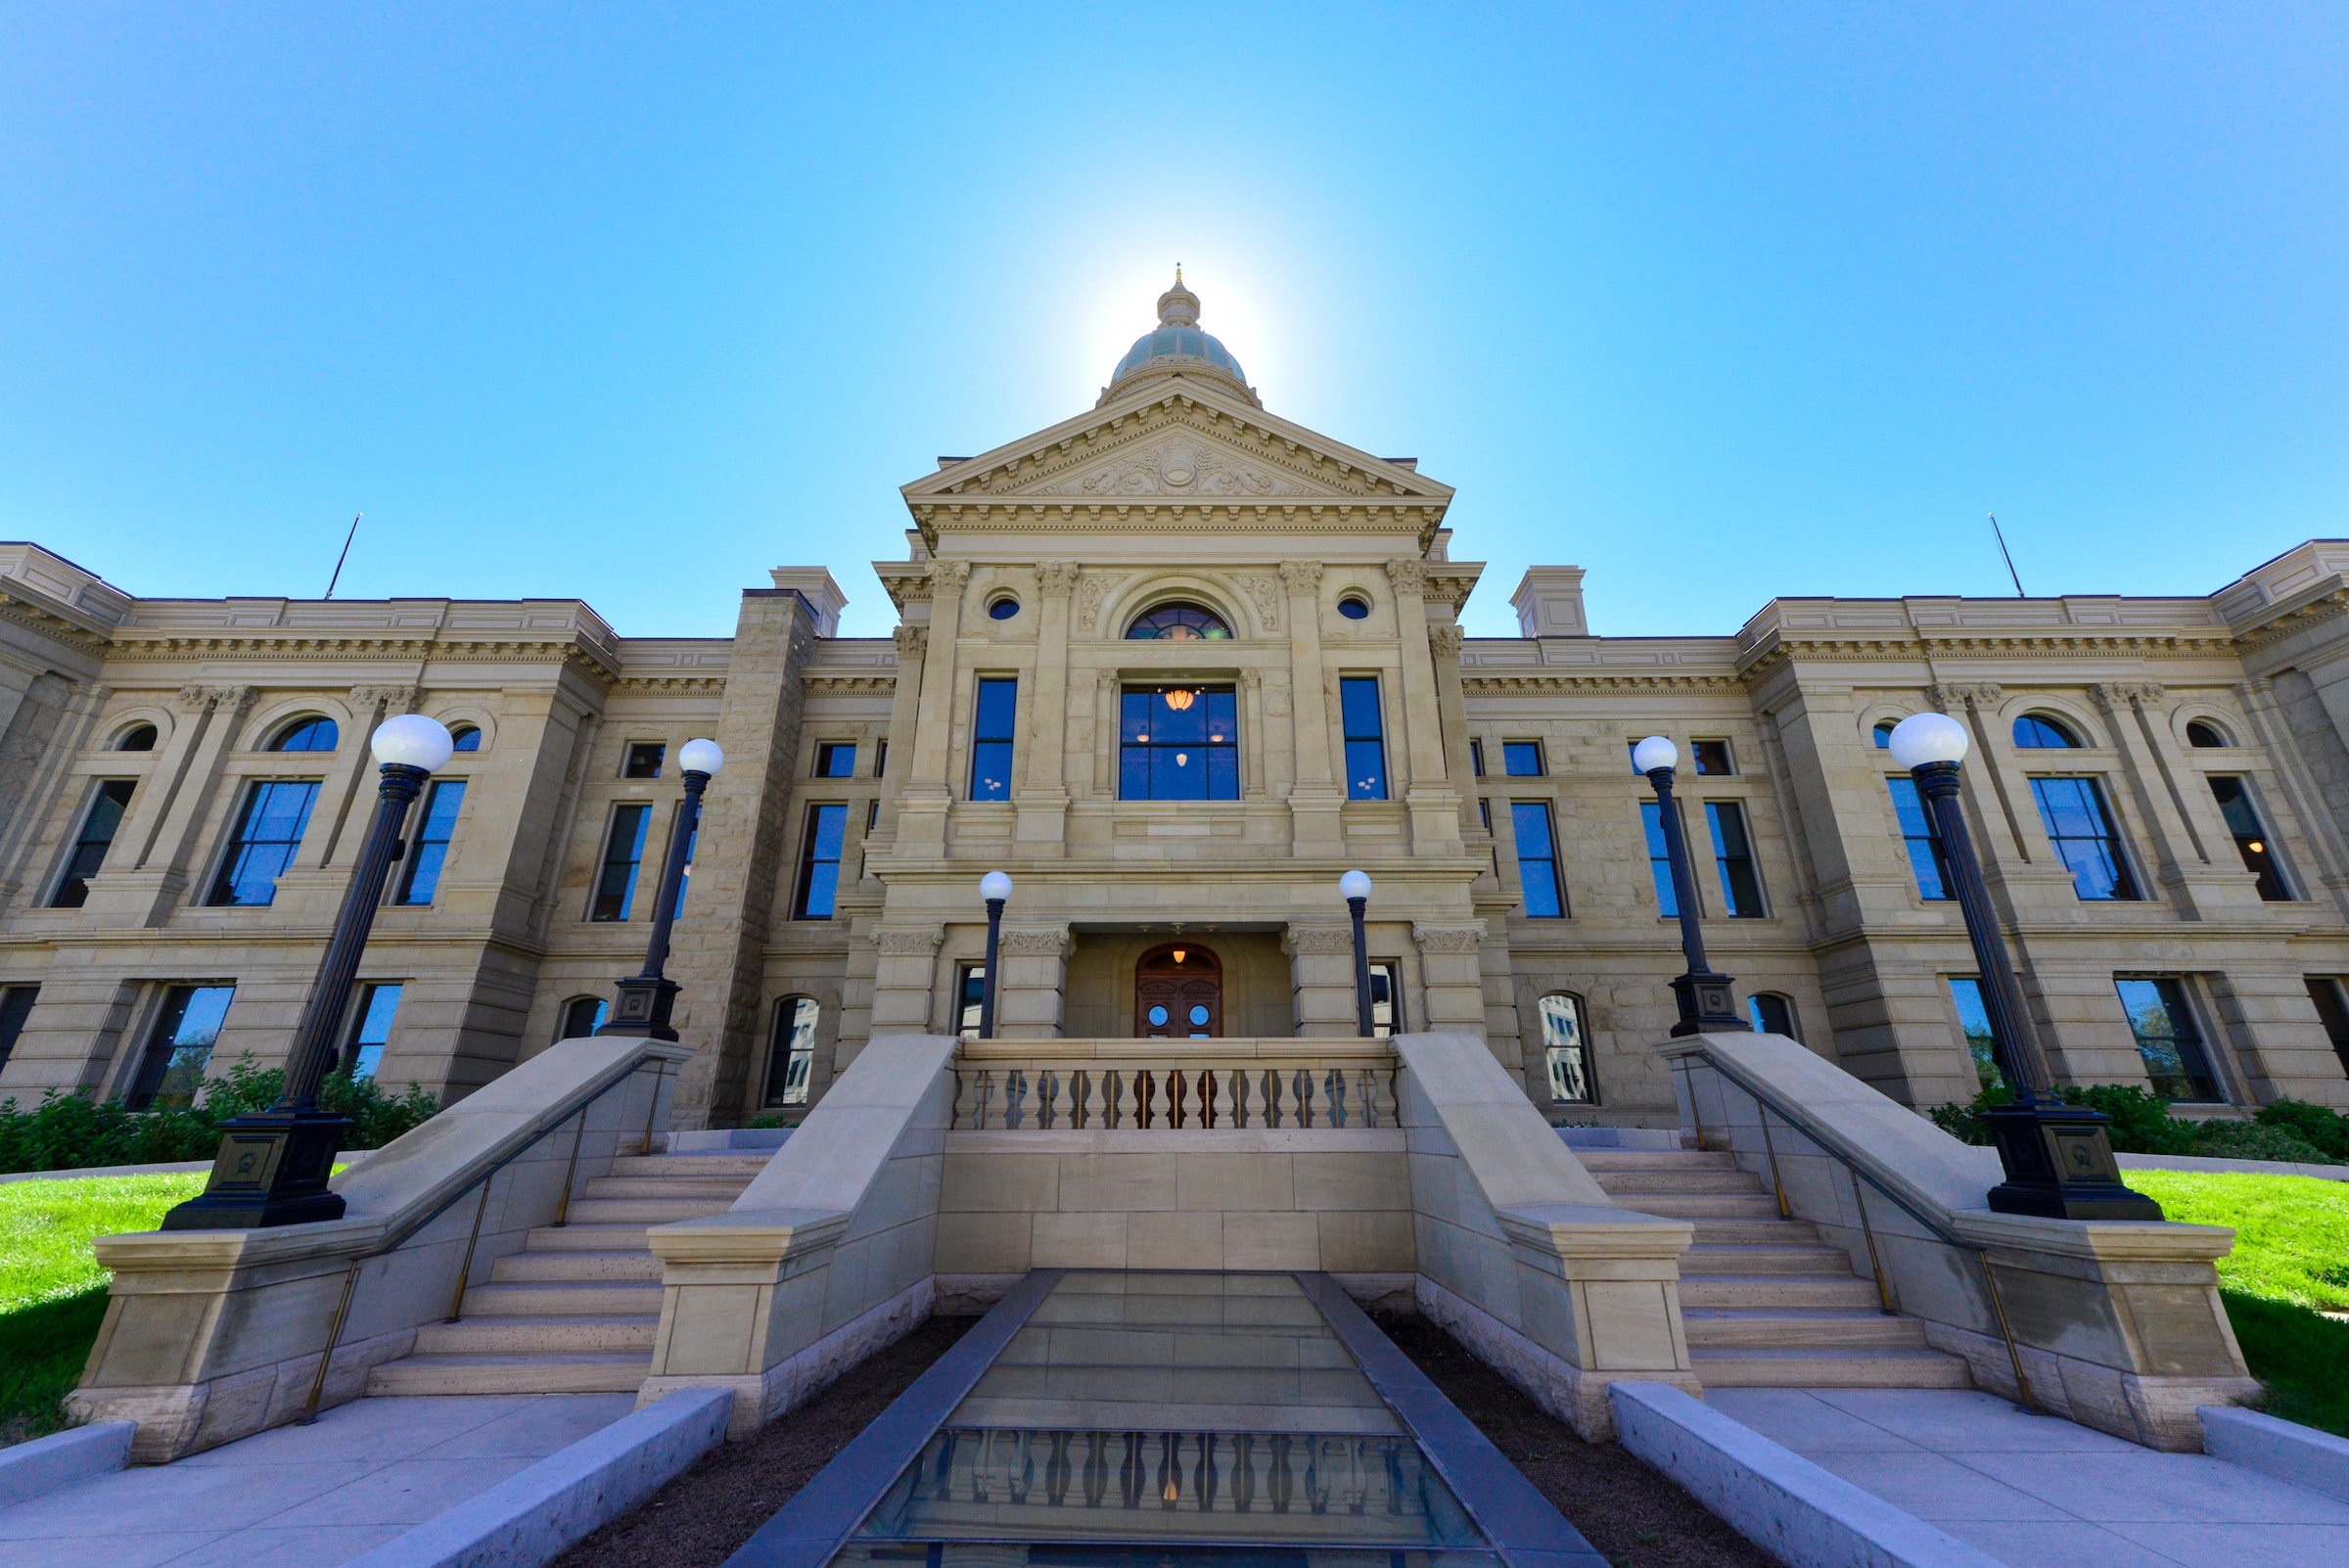 Wyoming State Capitol, Cheyenne, Wy. Photo by Pete Alexopoulos on Unsplash